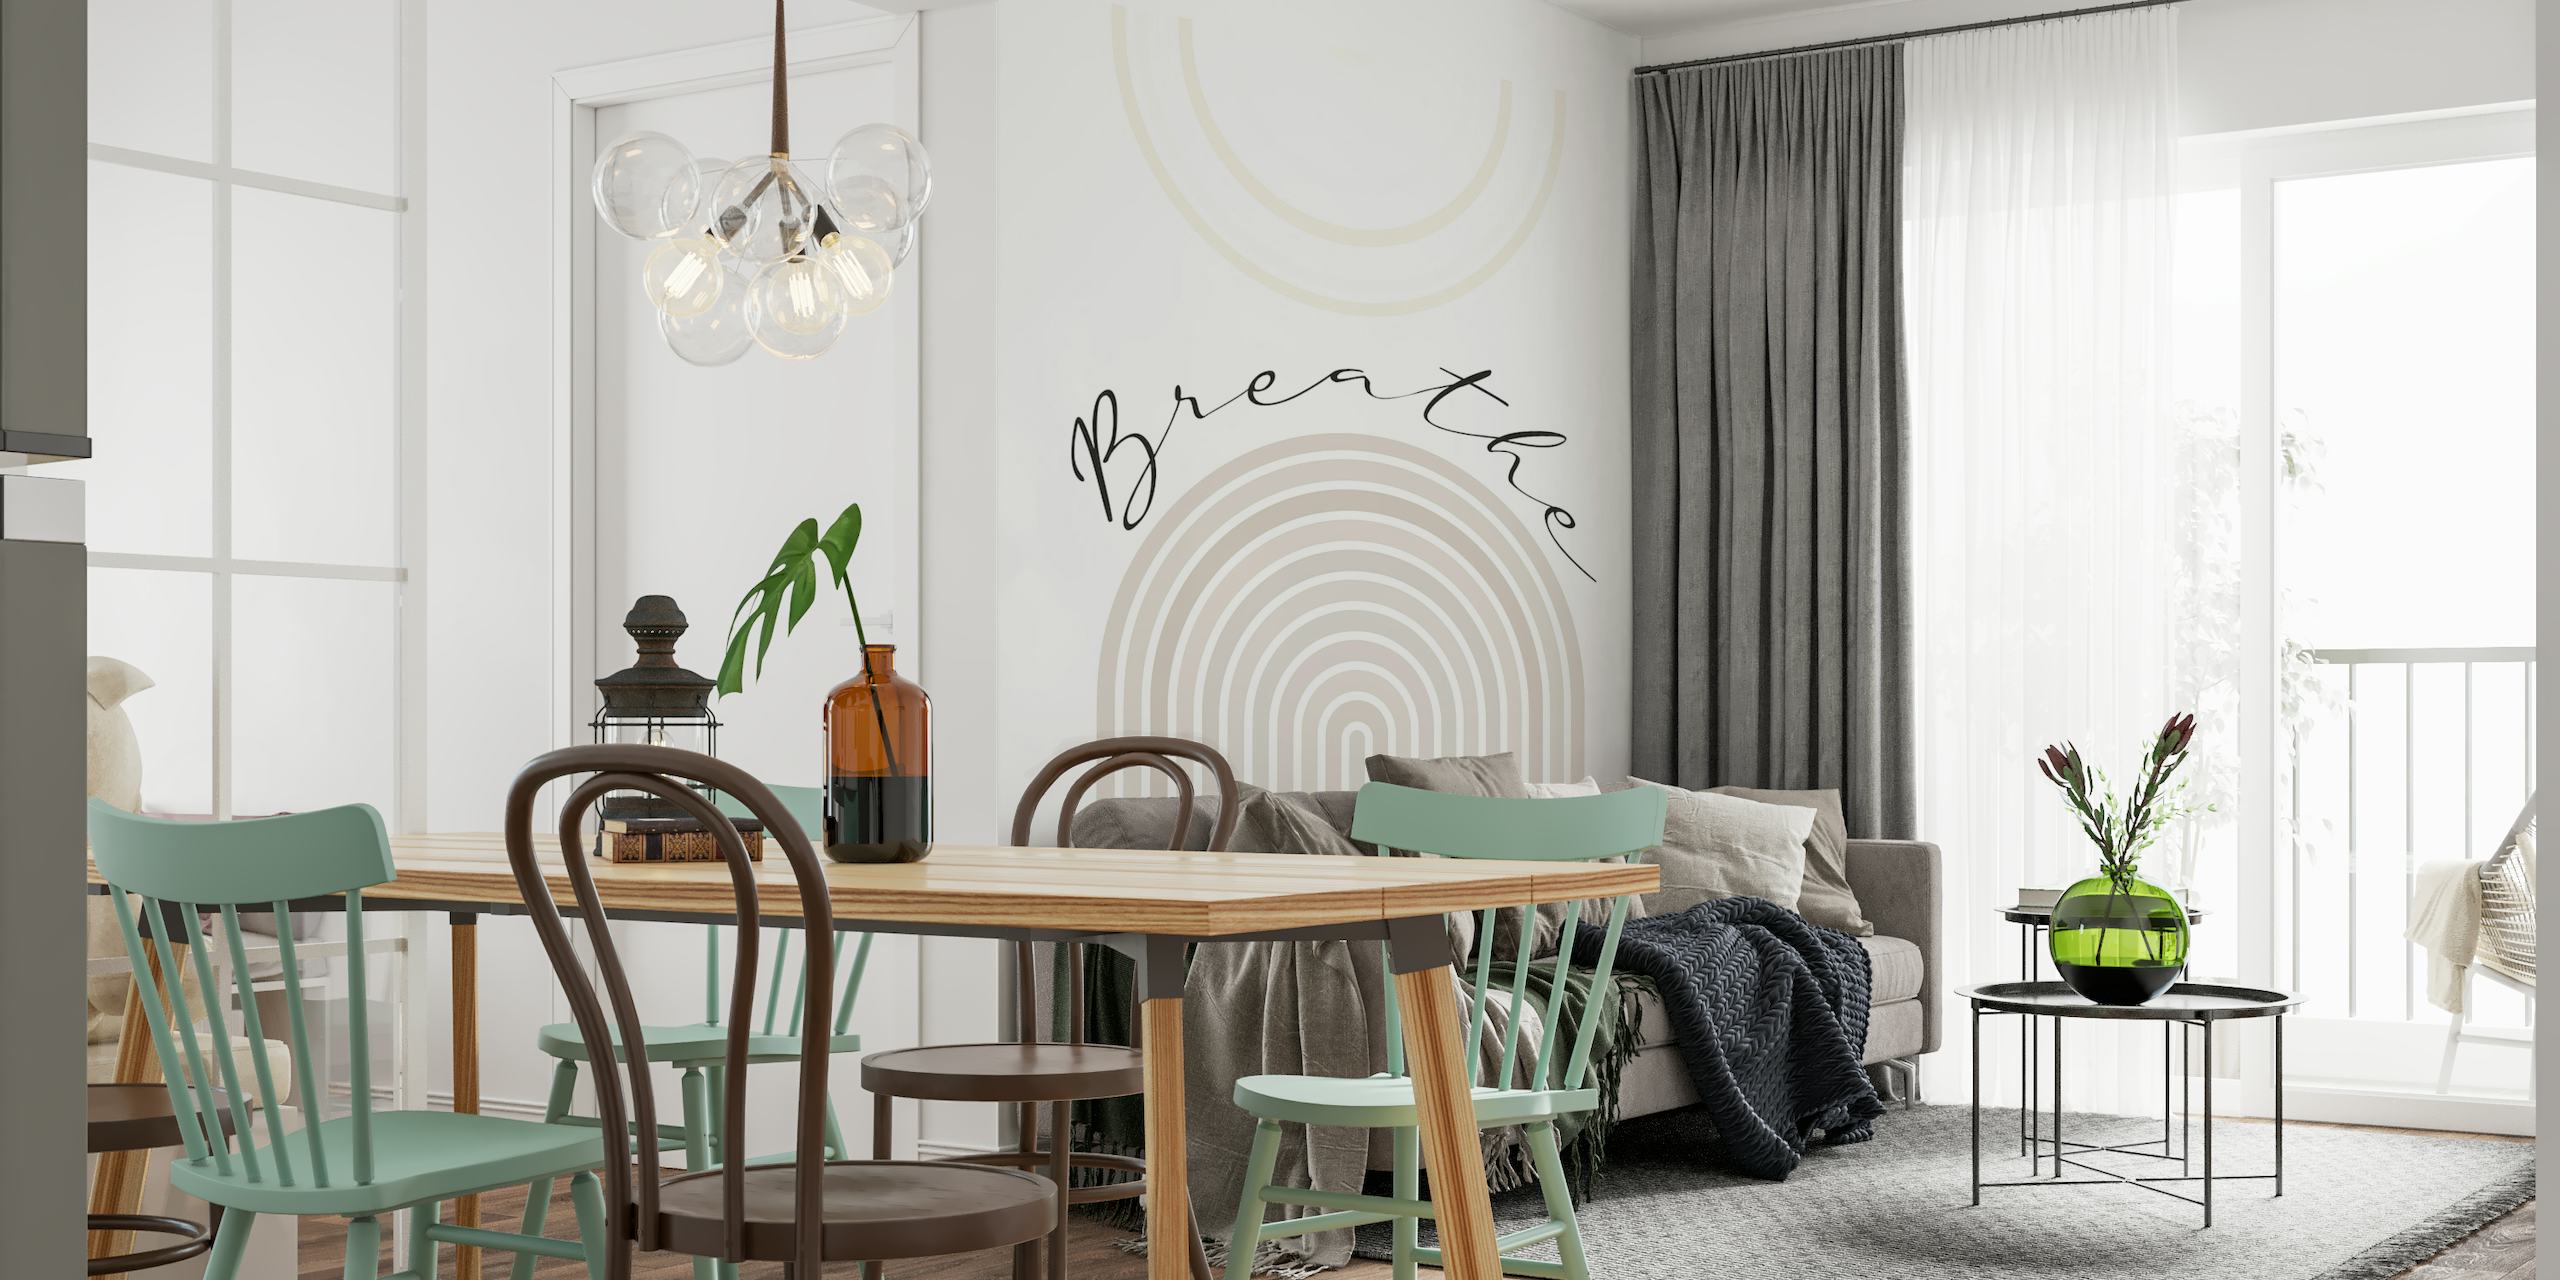 Minimalist Breathe Rainbow design with serene arch patterns for wall mural